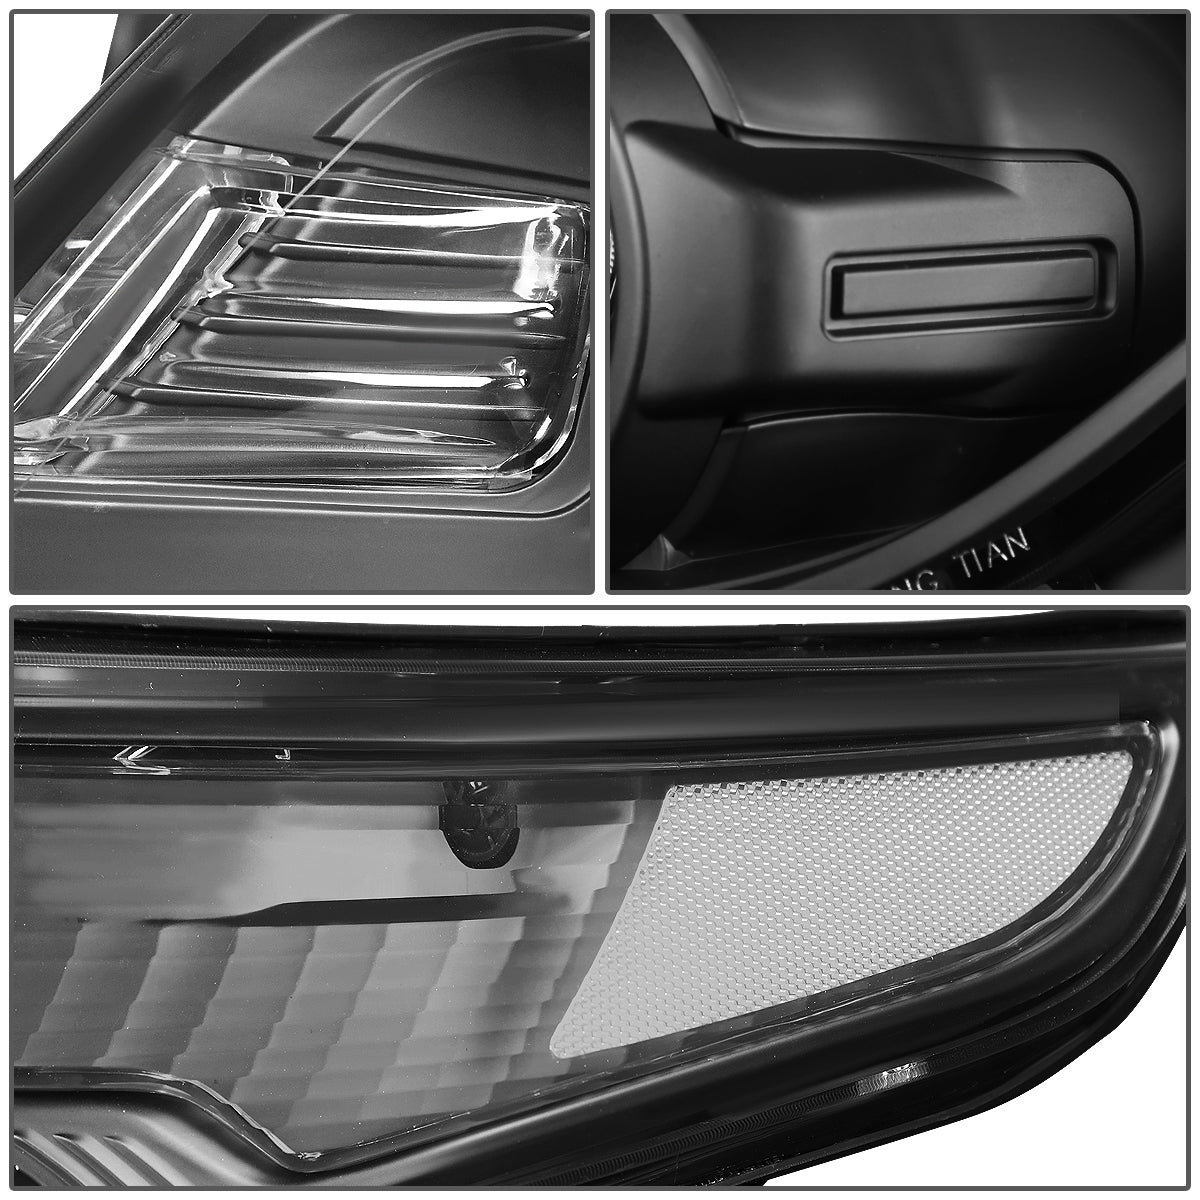 Factory Style Projector Headlights <br>11-15 Ford Explorer